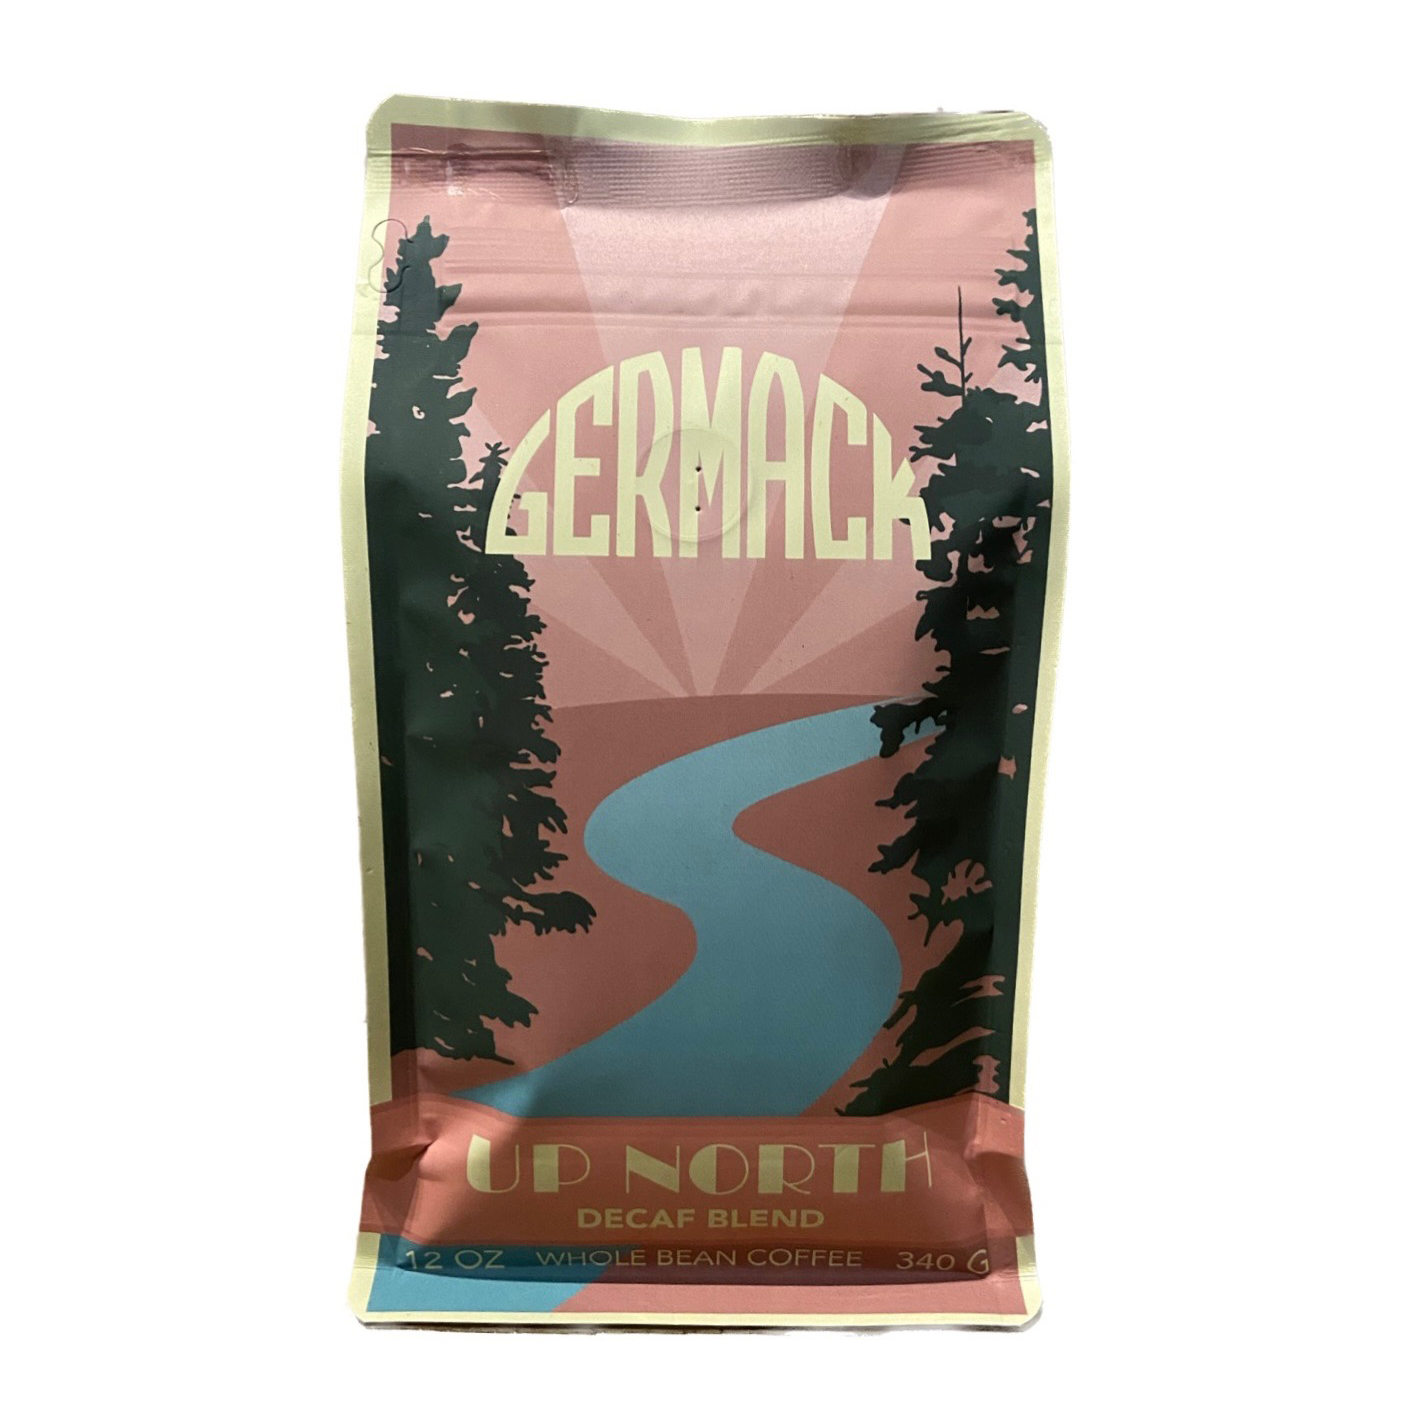 Picture Germack Coffee Blend (12 oz.) - Up North Decaf